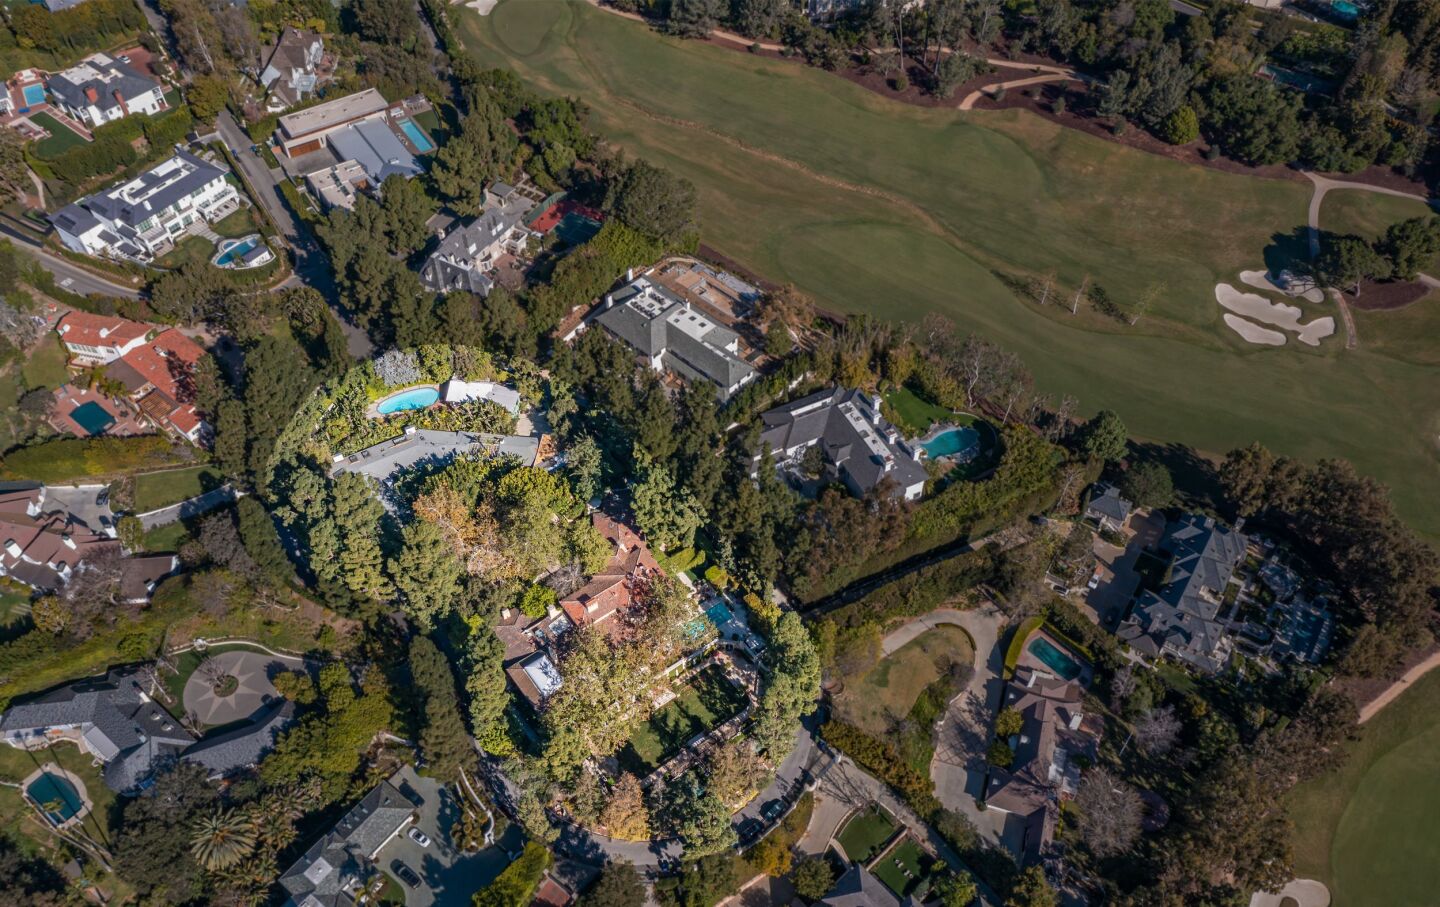 Aerial view of the compound.